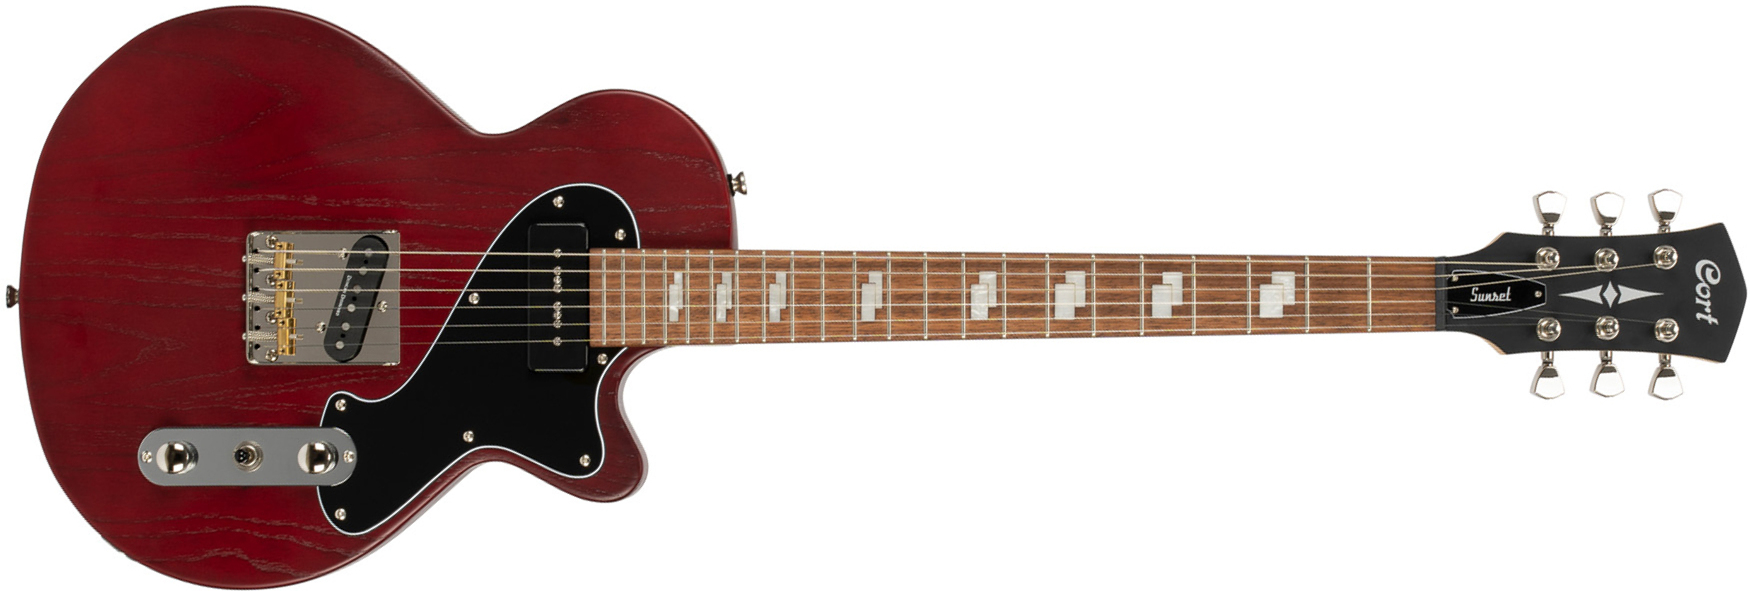 Cort Sunset Tc Opbr Ss Ht Jat - Open Pore Burgundy Red - Single cut electric guitar - Main picture